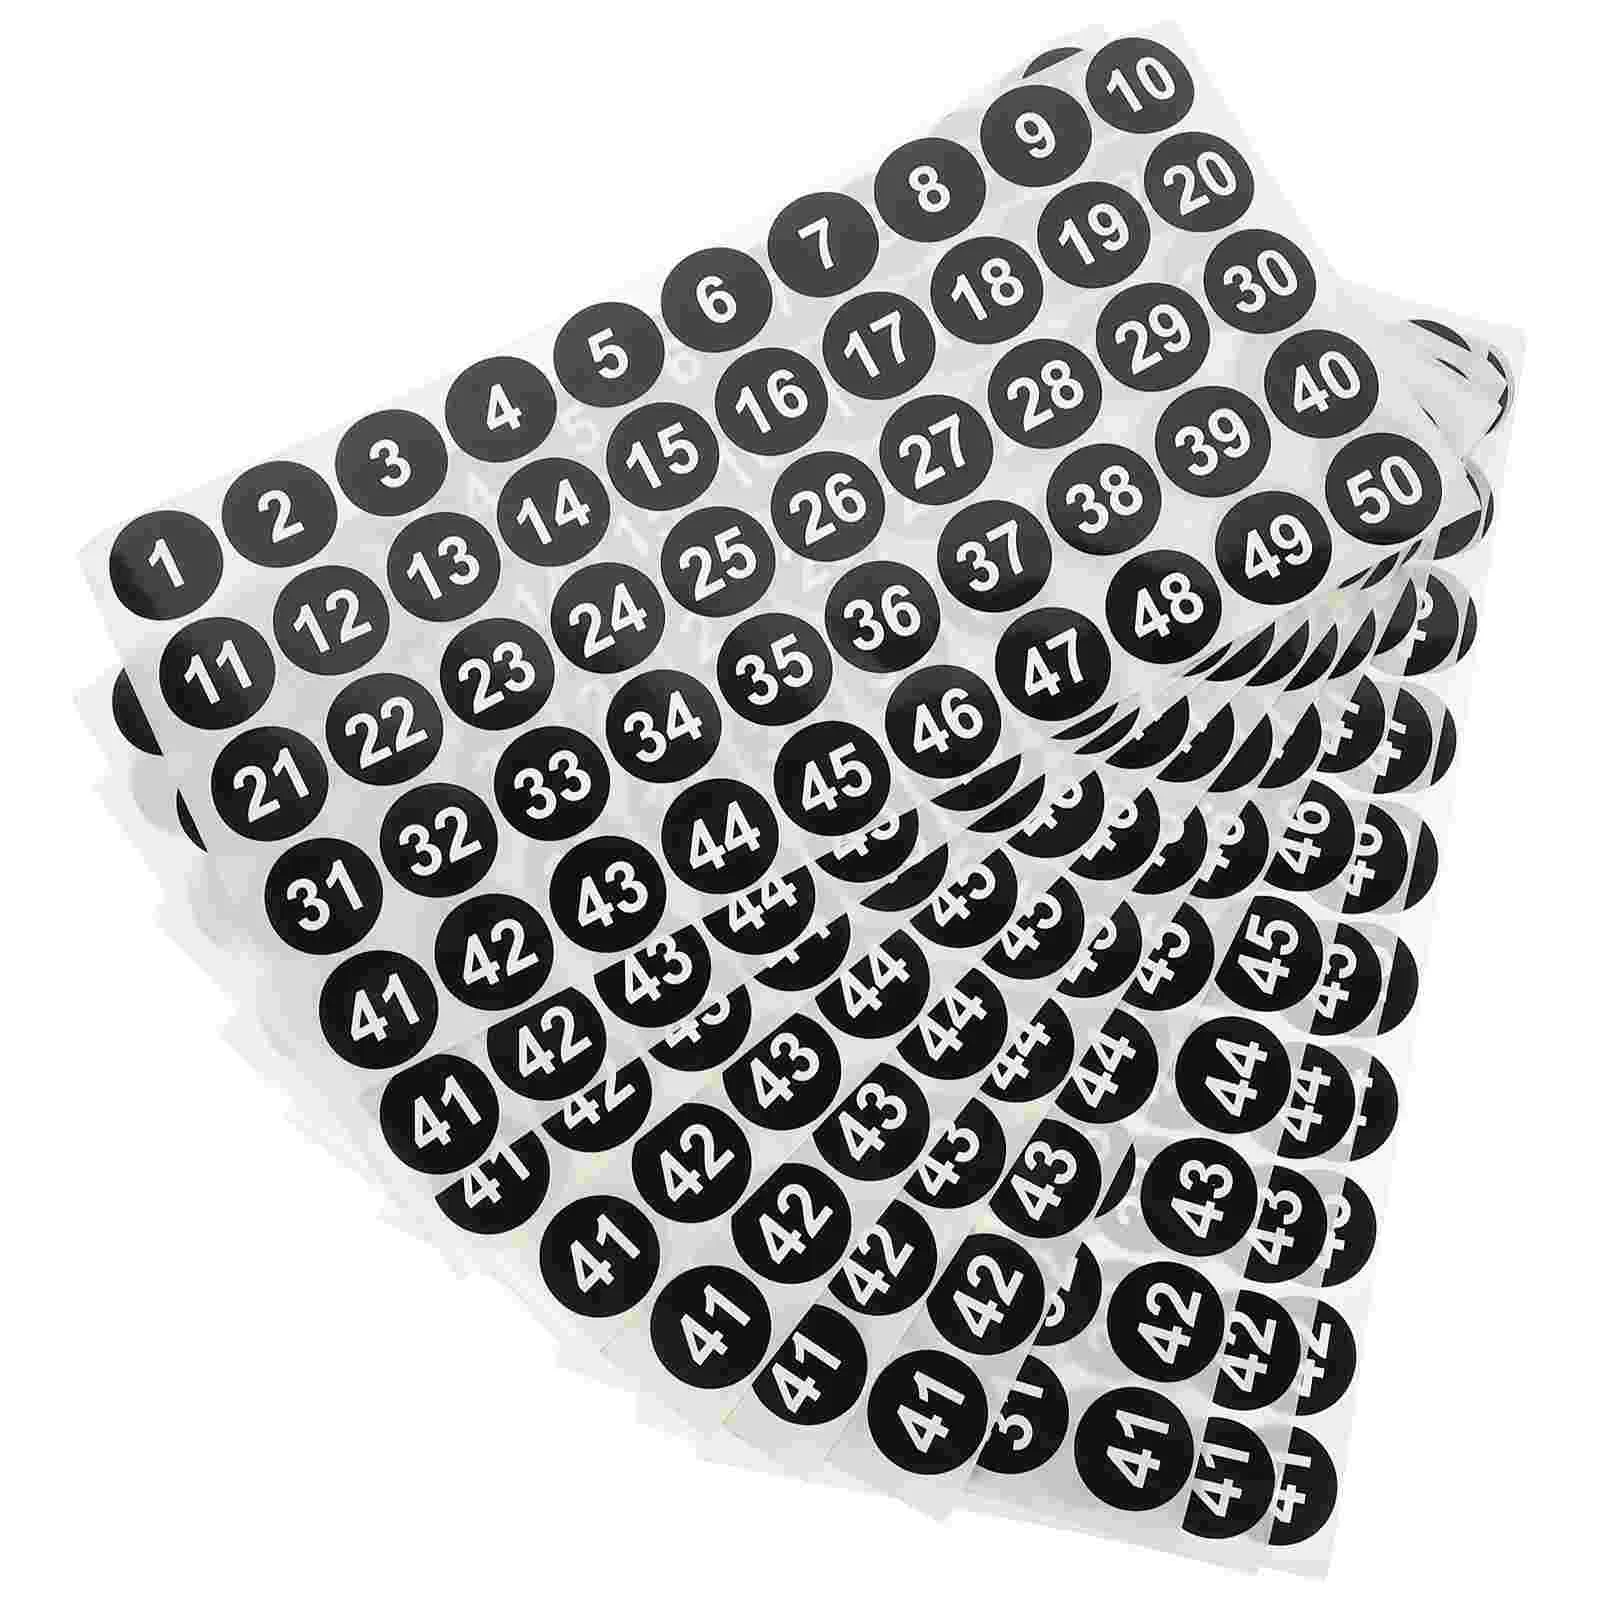 1-500 Round White Color Paper Number Sticker Size Label Adhesive Clothing  Label Round Number Sticker Digital Consecutive Label - Stickers - AliExpress